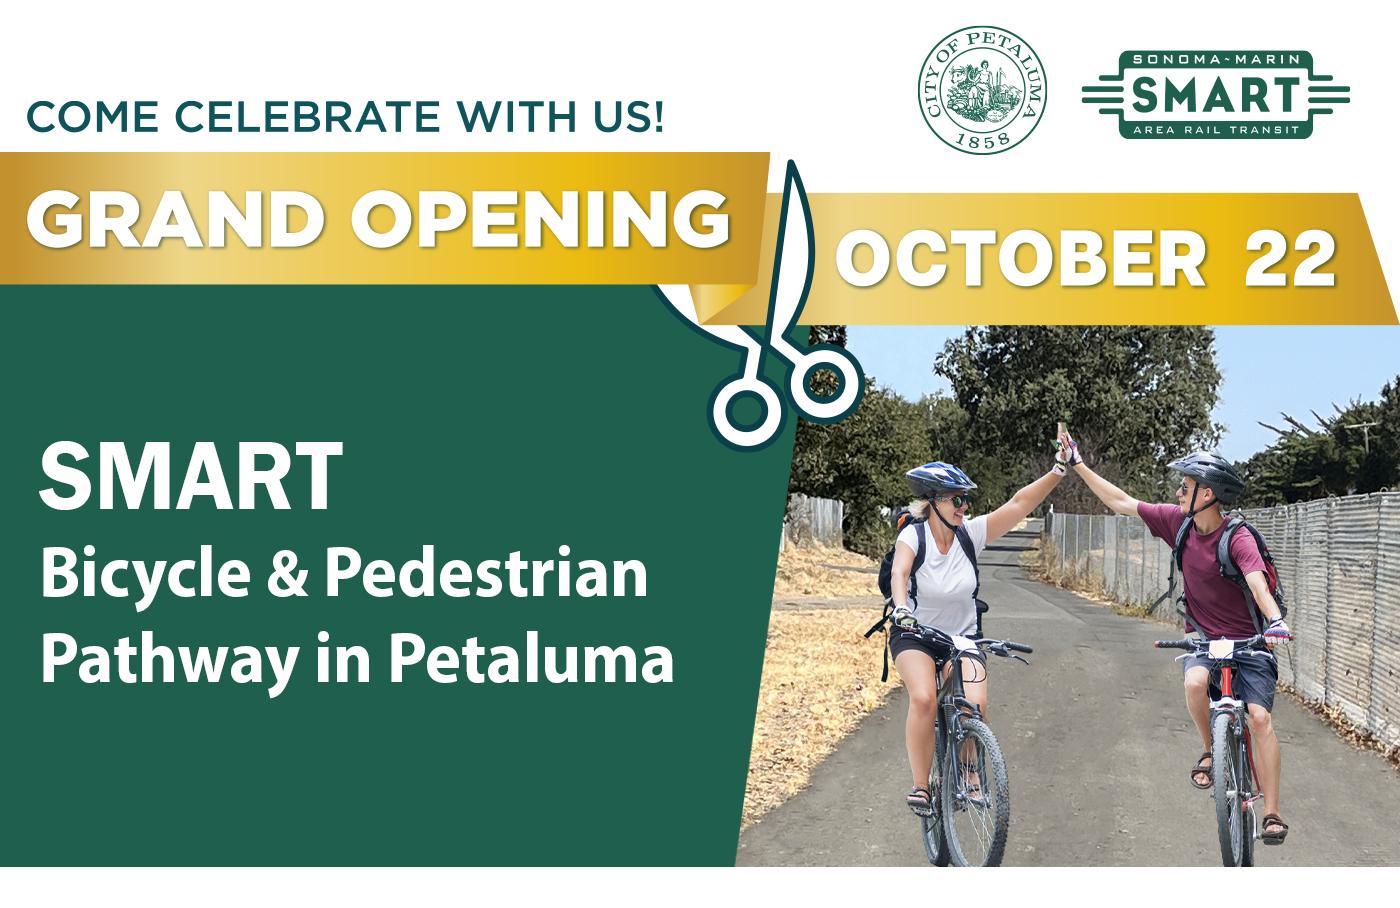 Come celebrate the grad opening of the SMART pathway